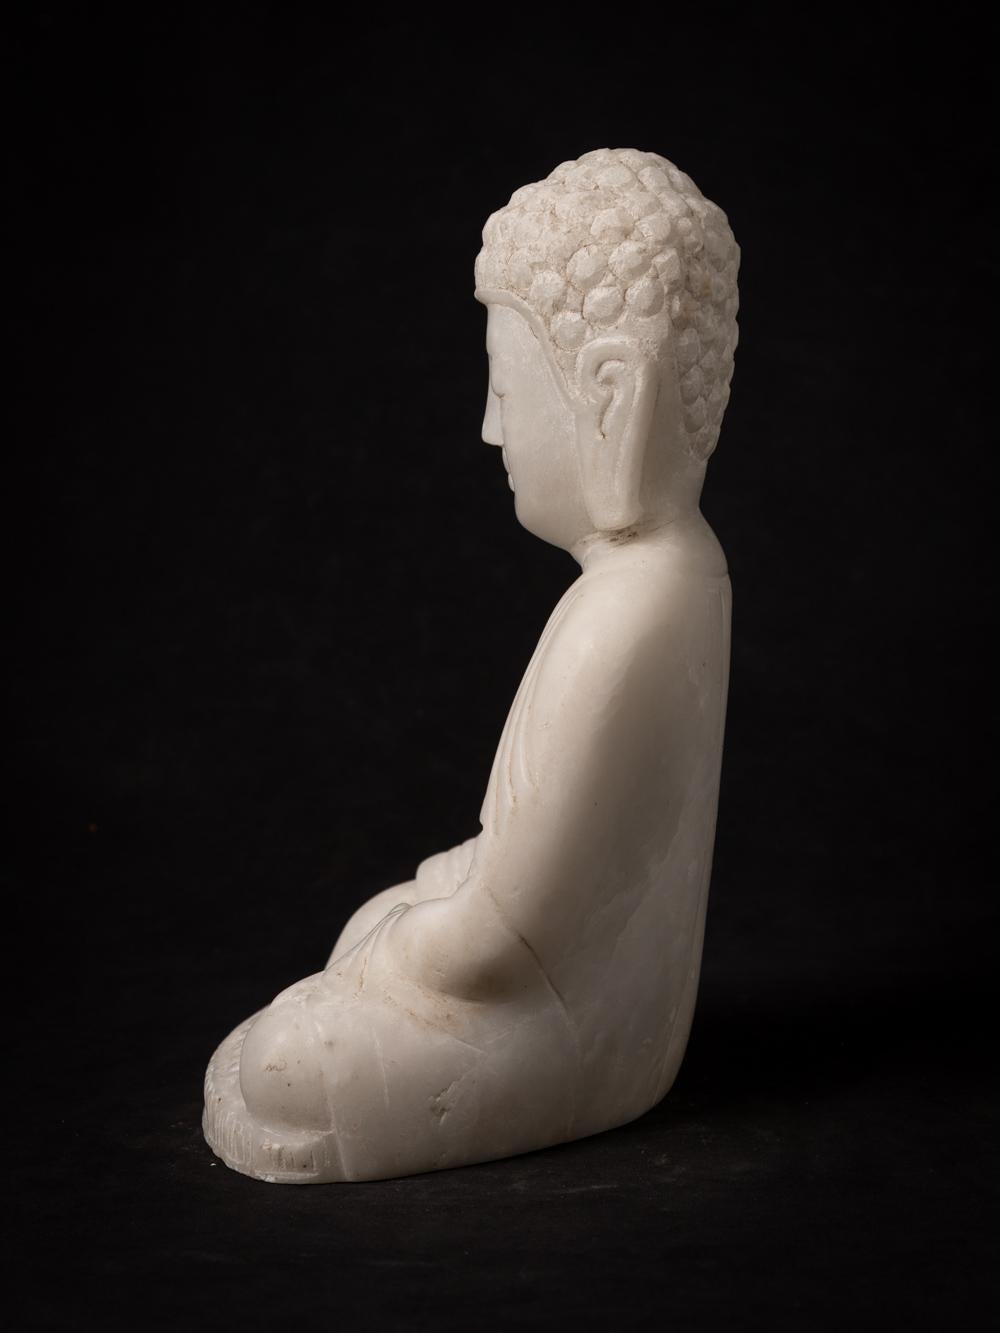 This elegant Marble Buddha statue, portraying the Bhumisparsha mudra, is a work of art that stands at 28.5 cm in height, with dimensions of 19.4 cm in width and 14.3 cm in depth. Carved by hand from a single block of white marble, it represents a